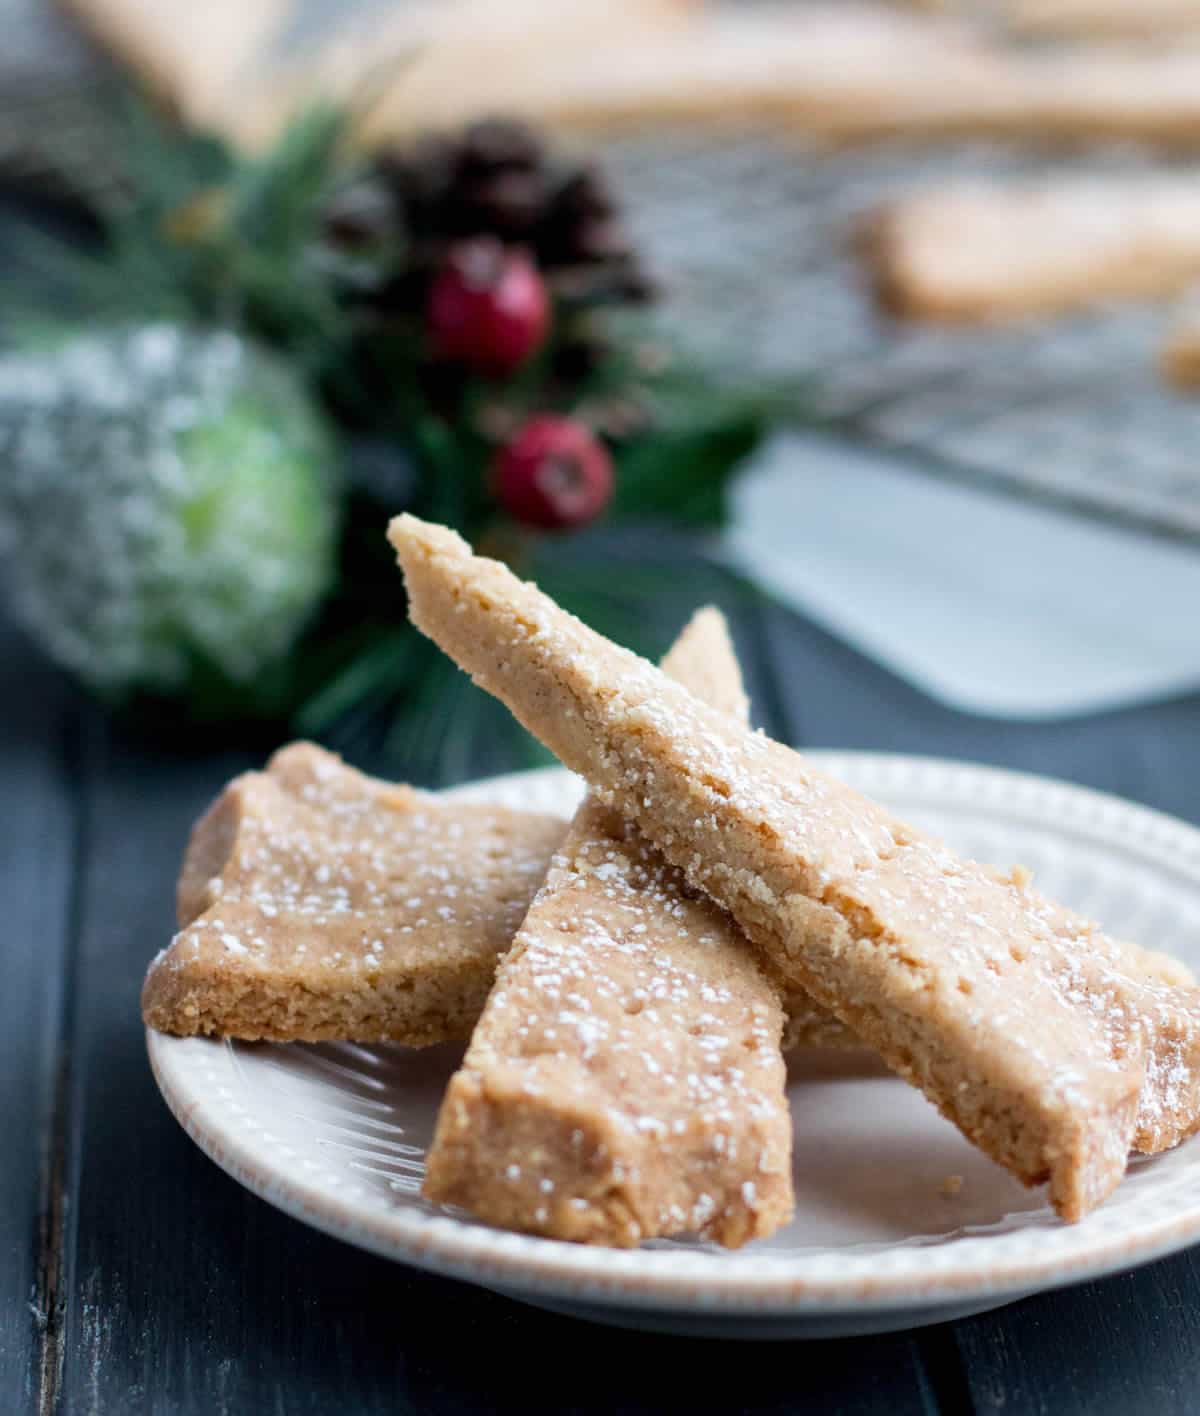 Three pieces of Spiced Shortbread on a white plate dusted with powdered sugar by themerchantbaker.com